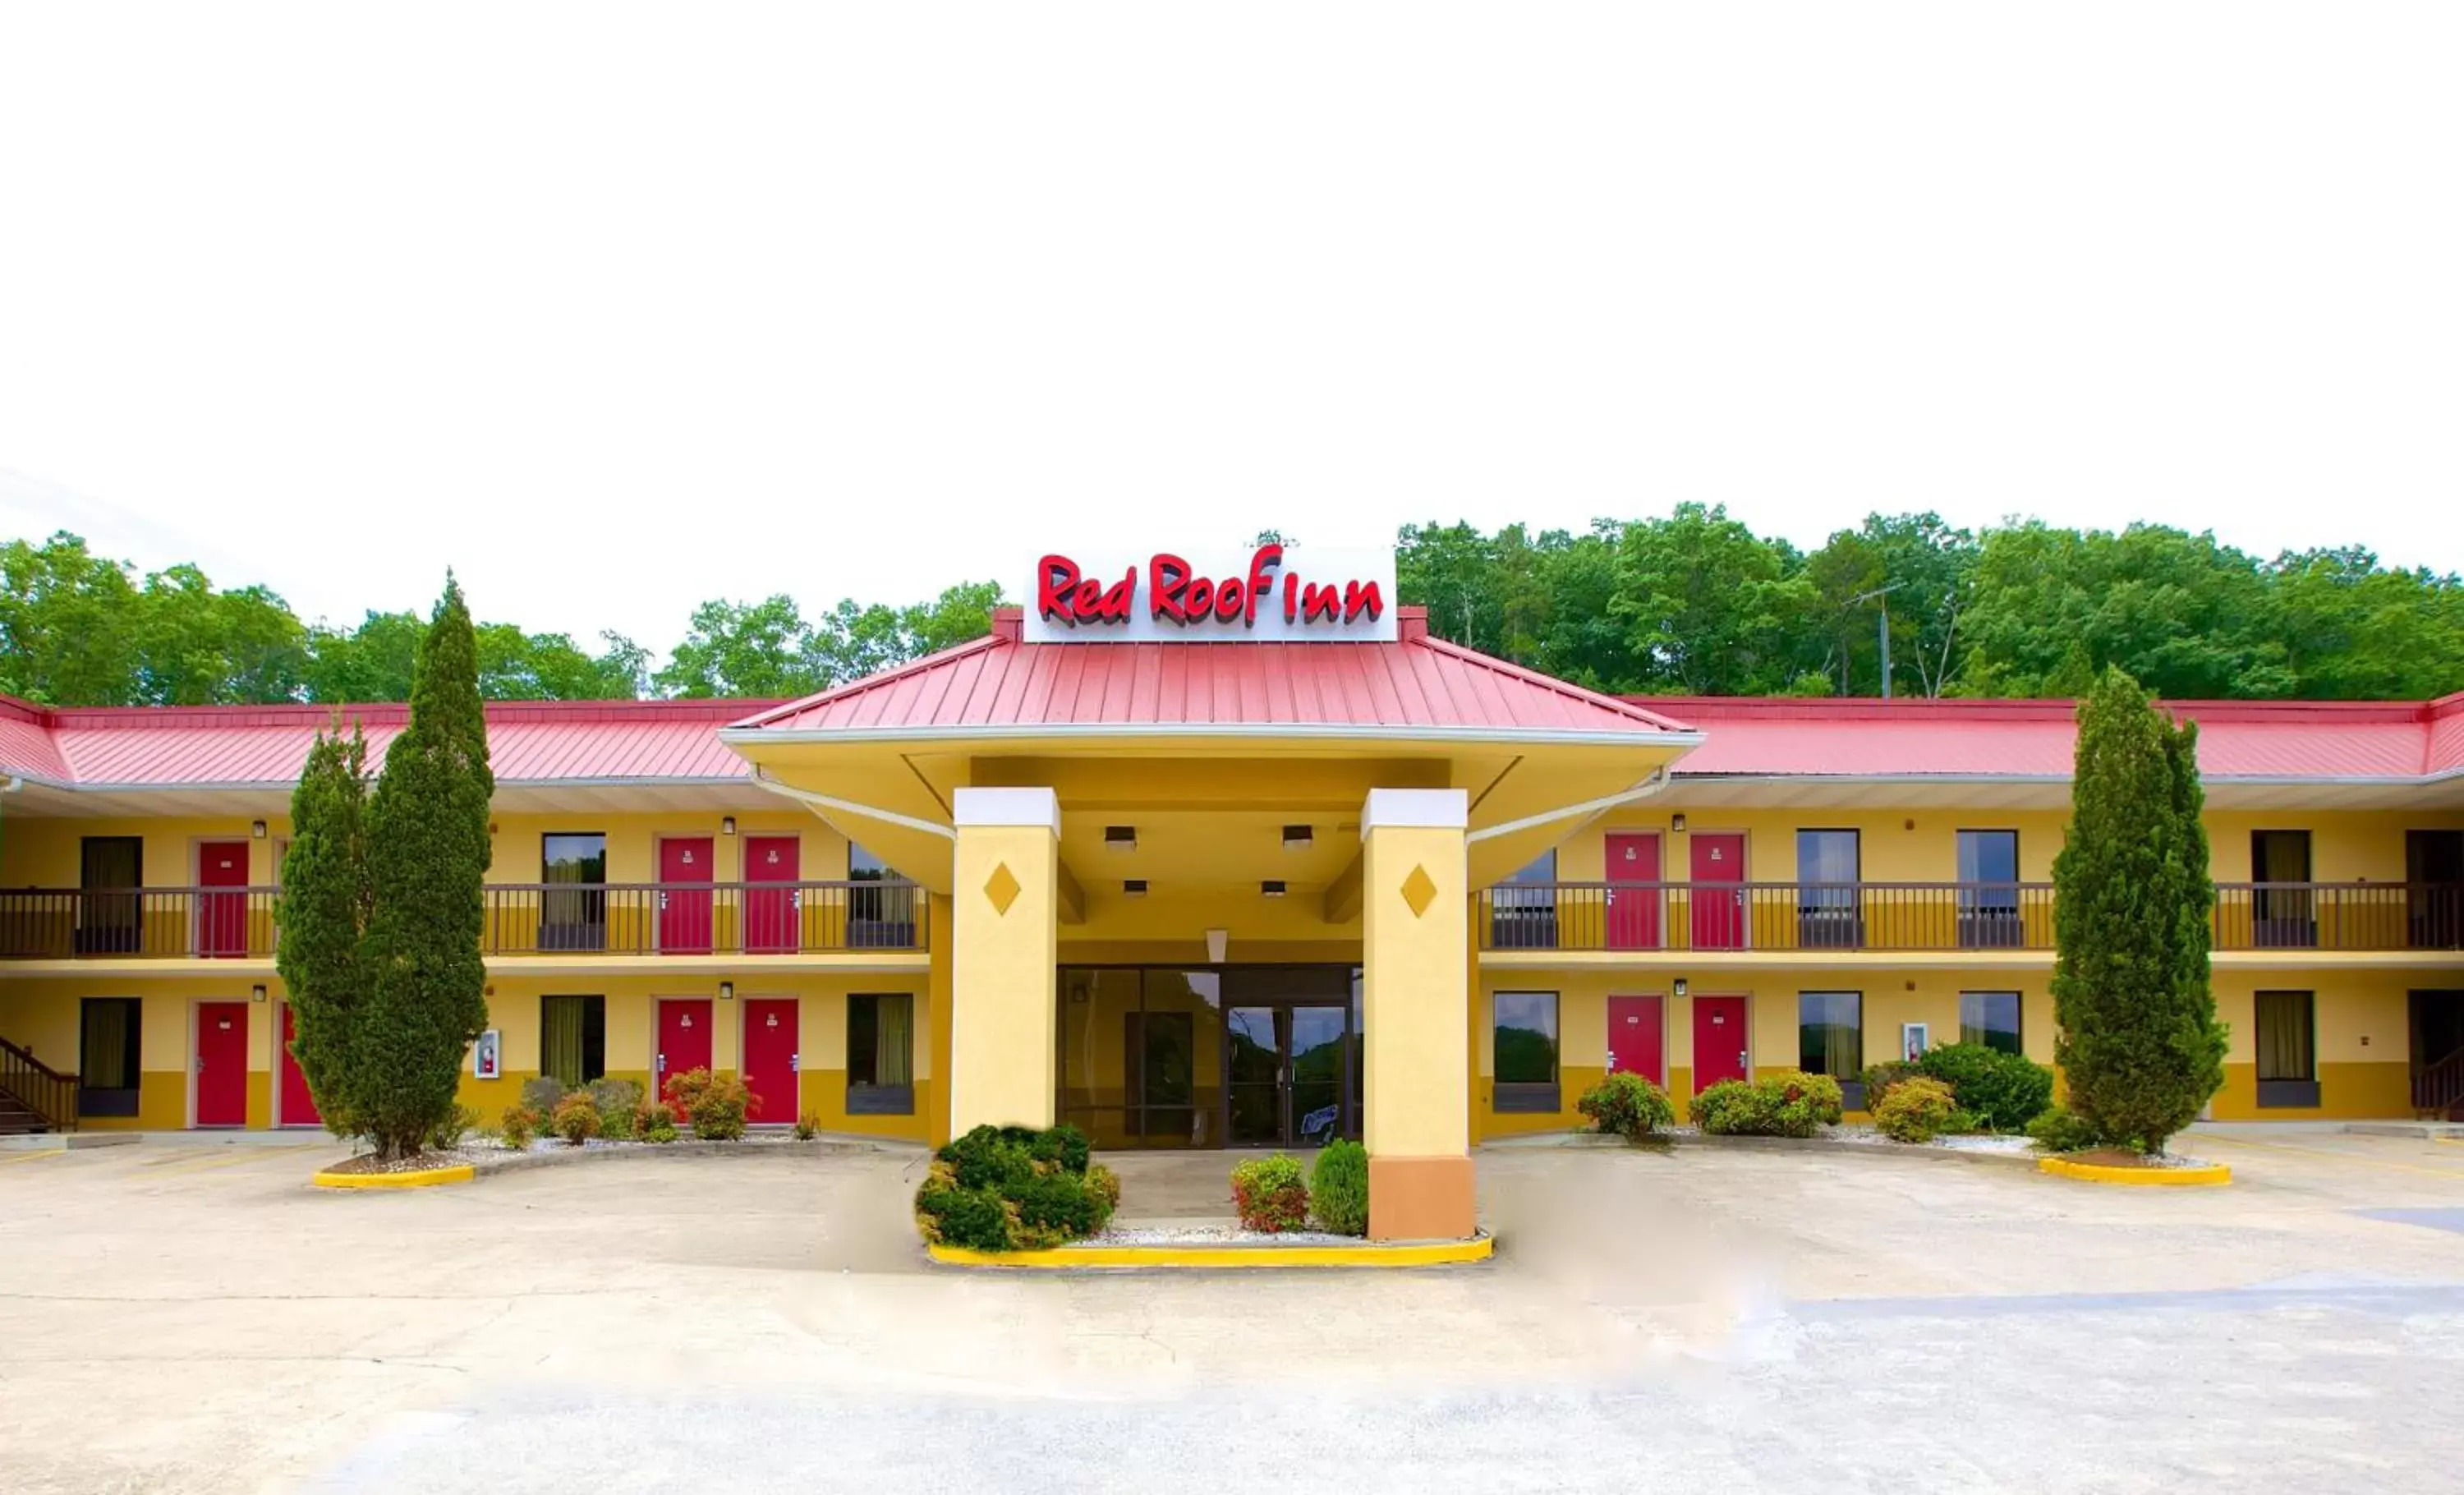 Property Building in Red Roof Inn Cartersville-Emerson-LakePoint North